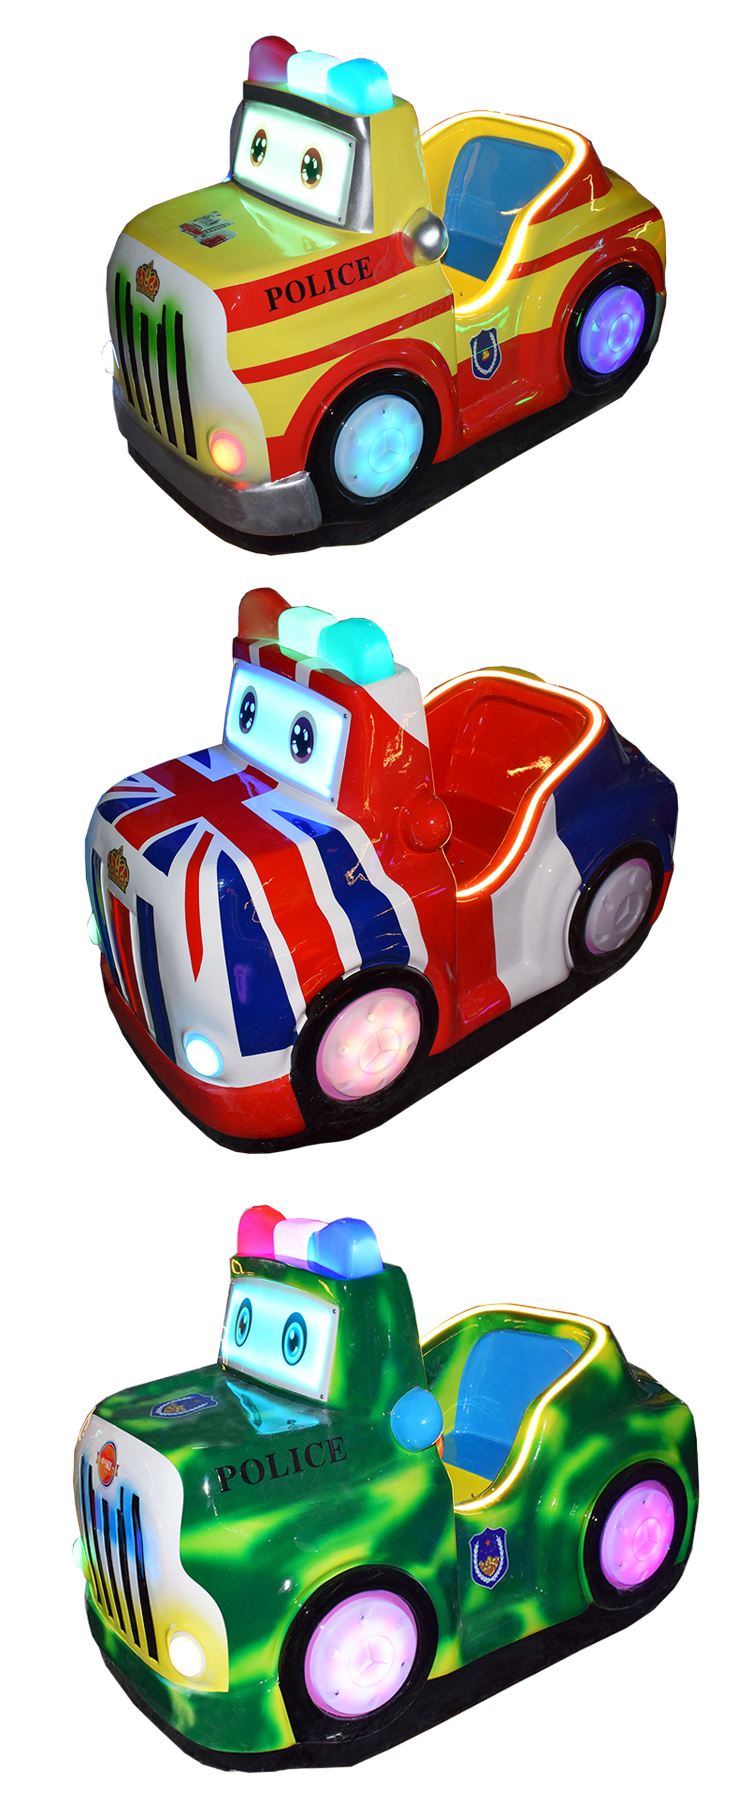 coin operated MP5 kiddie rides  police car 3D racing car swing game machine